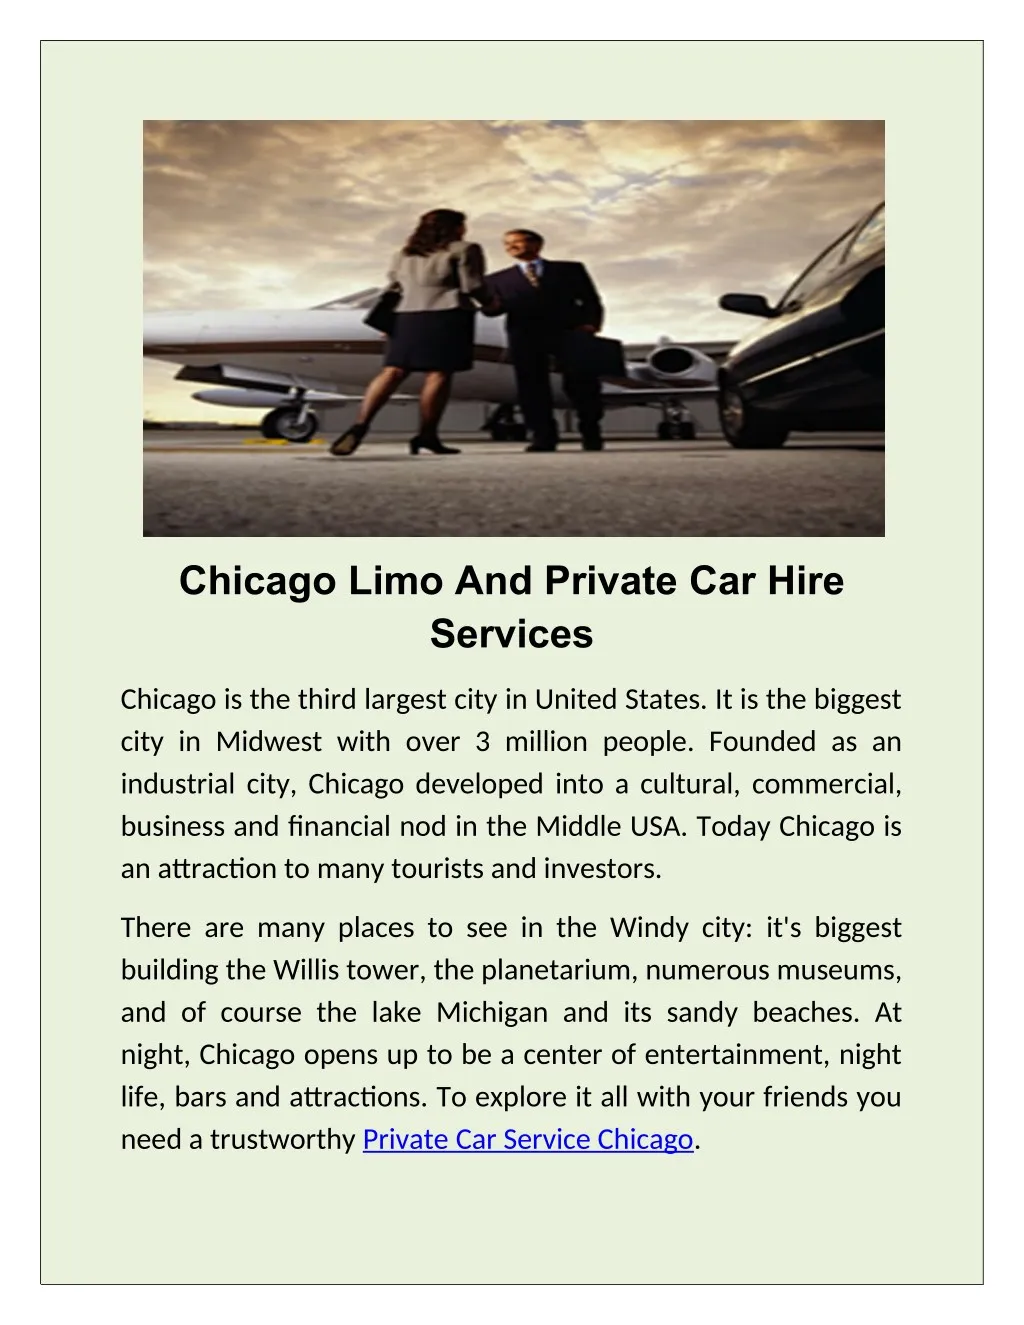 chicago limo and private car hire services